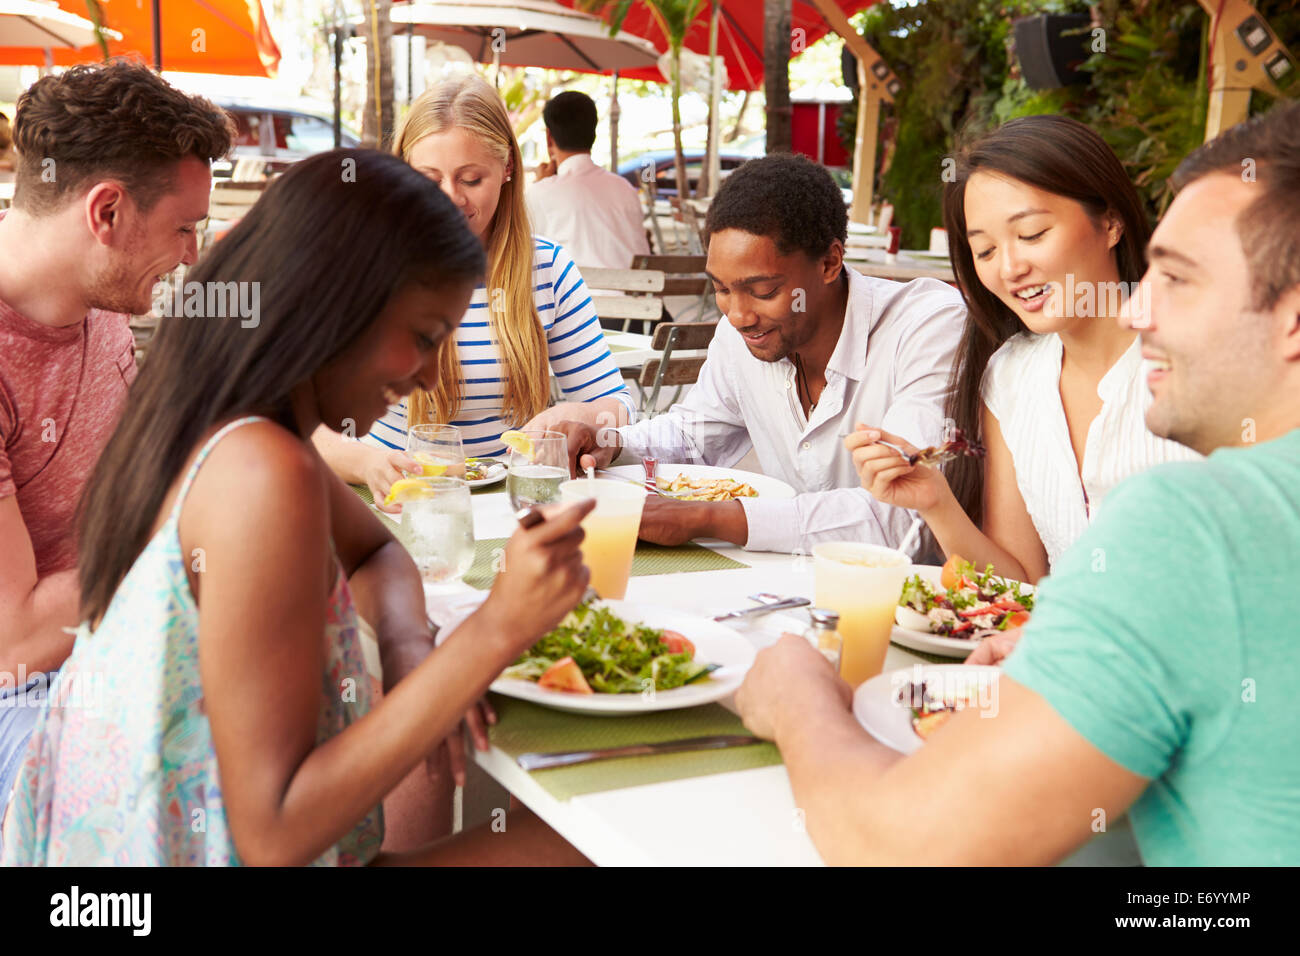 Group Of Friends Enjoying Lunch In Outdoor Restaurant Stock Photo